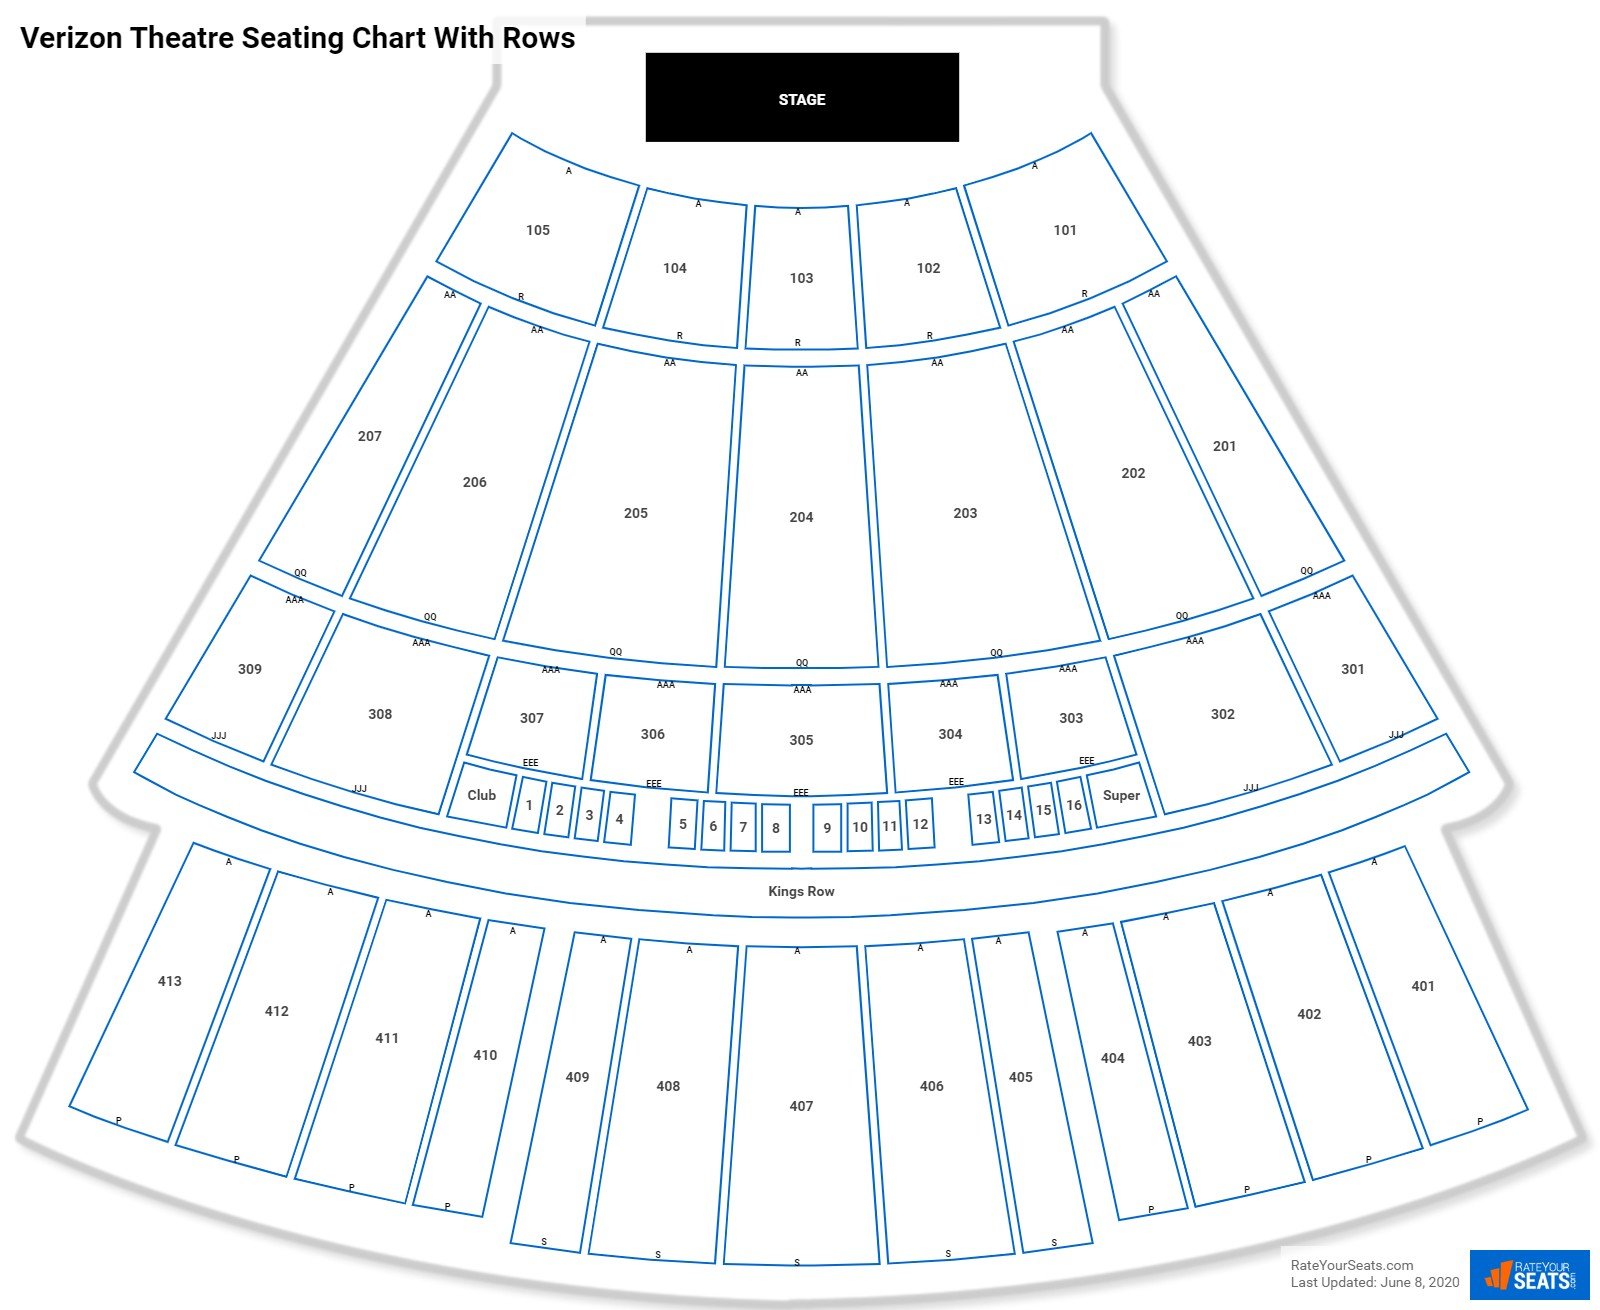 Texas Trust CU Theatre seating chart with row numbers